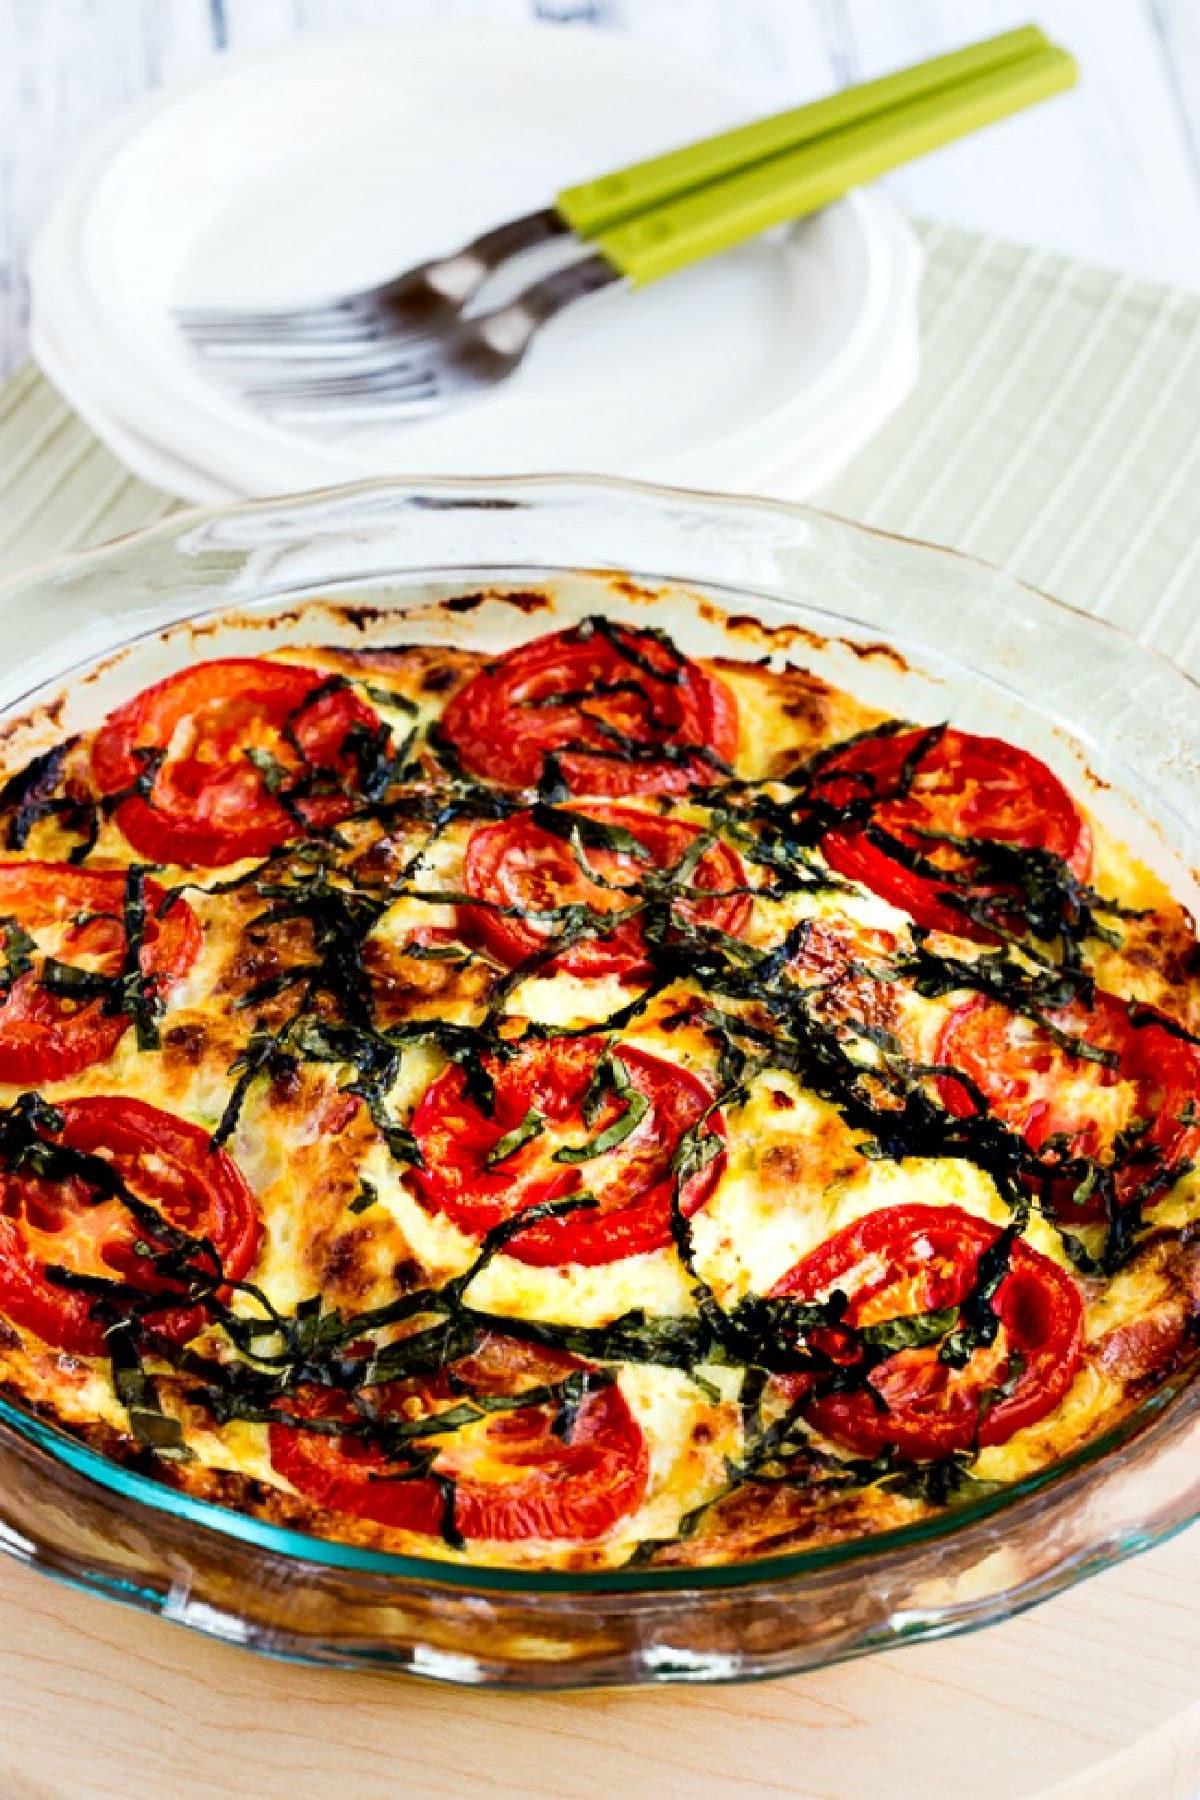 Crustless Three-Cheese Tomato-Basil Quiche shown in baking dish with plates-forks in background